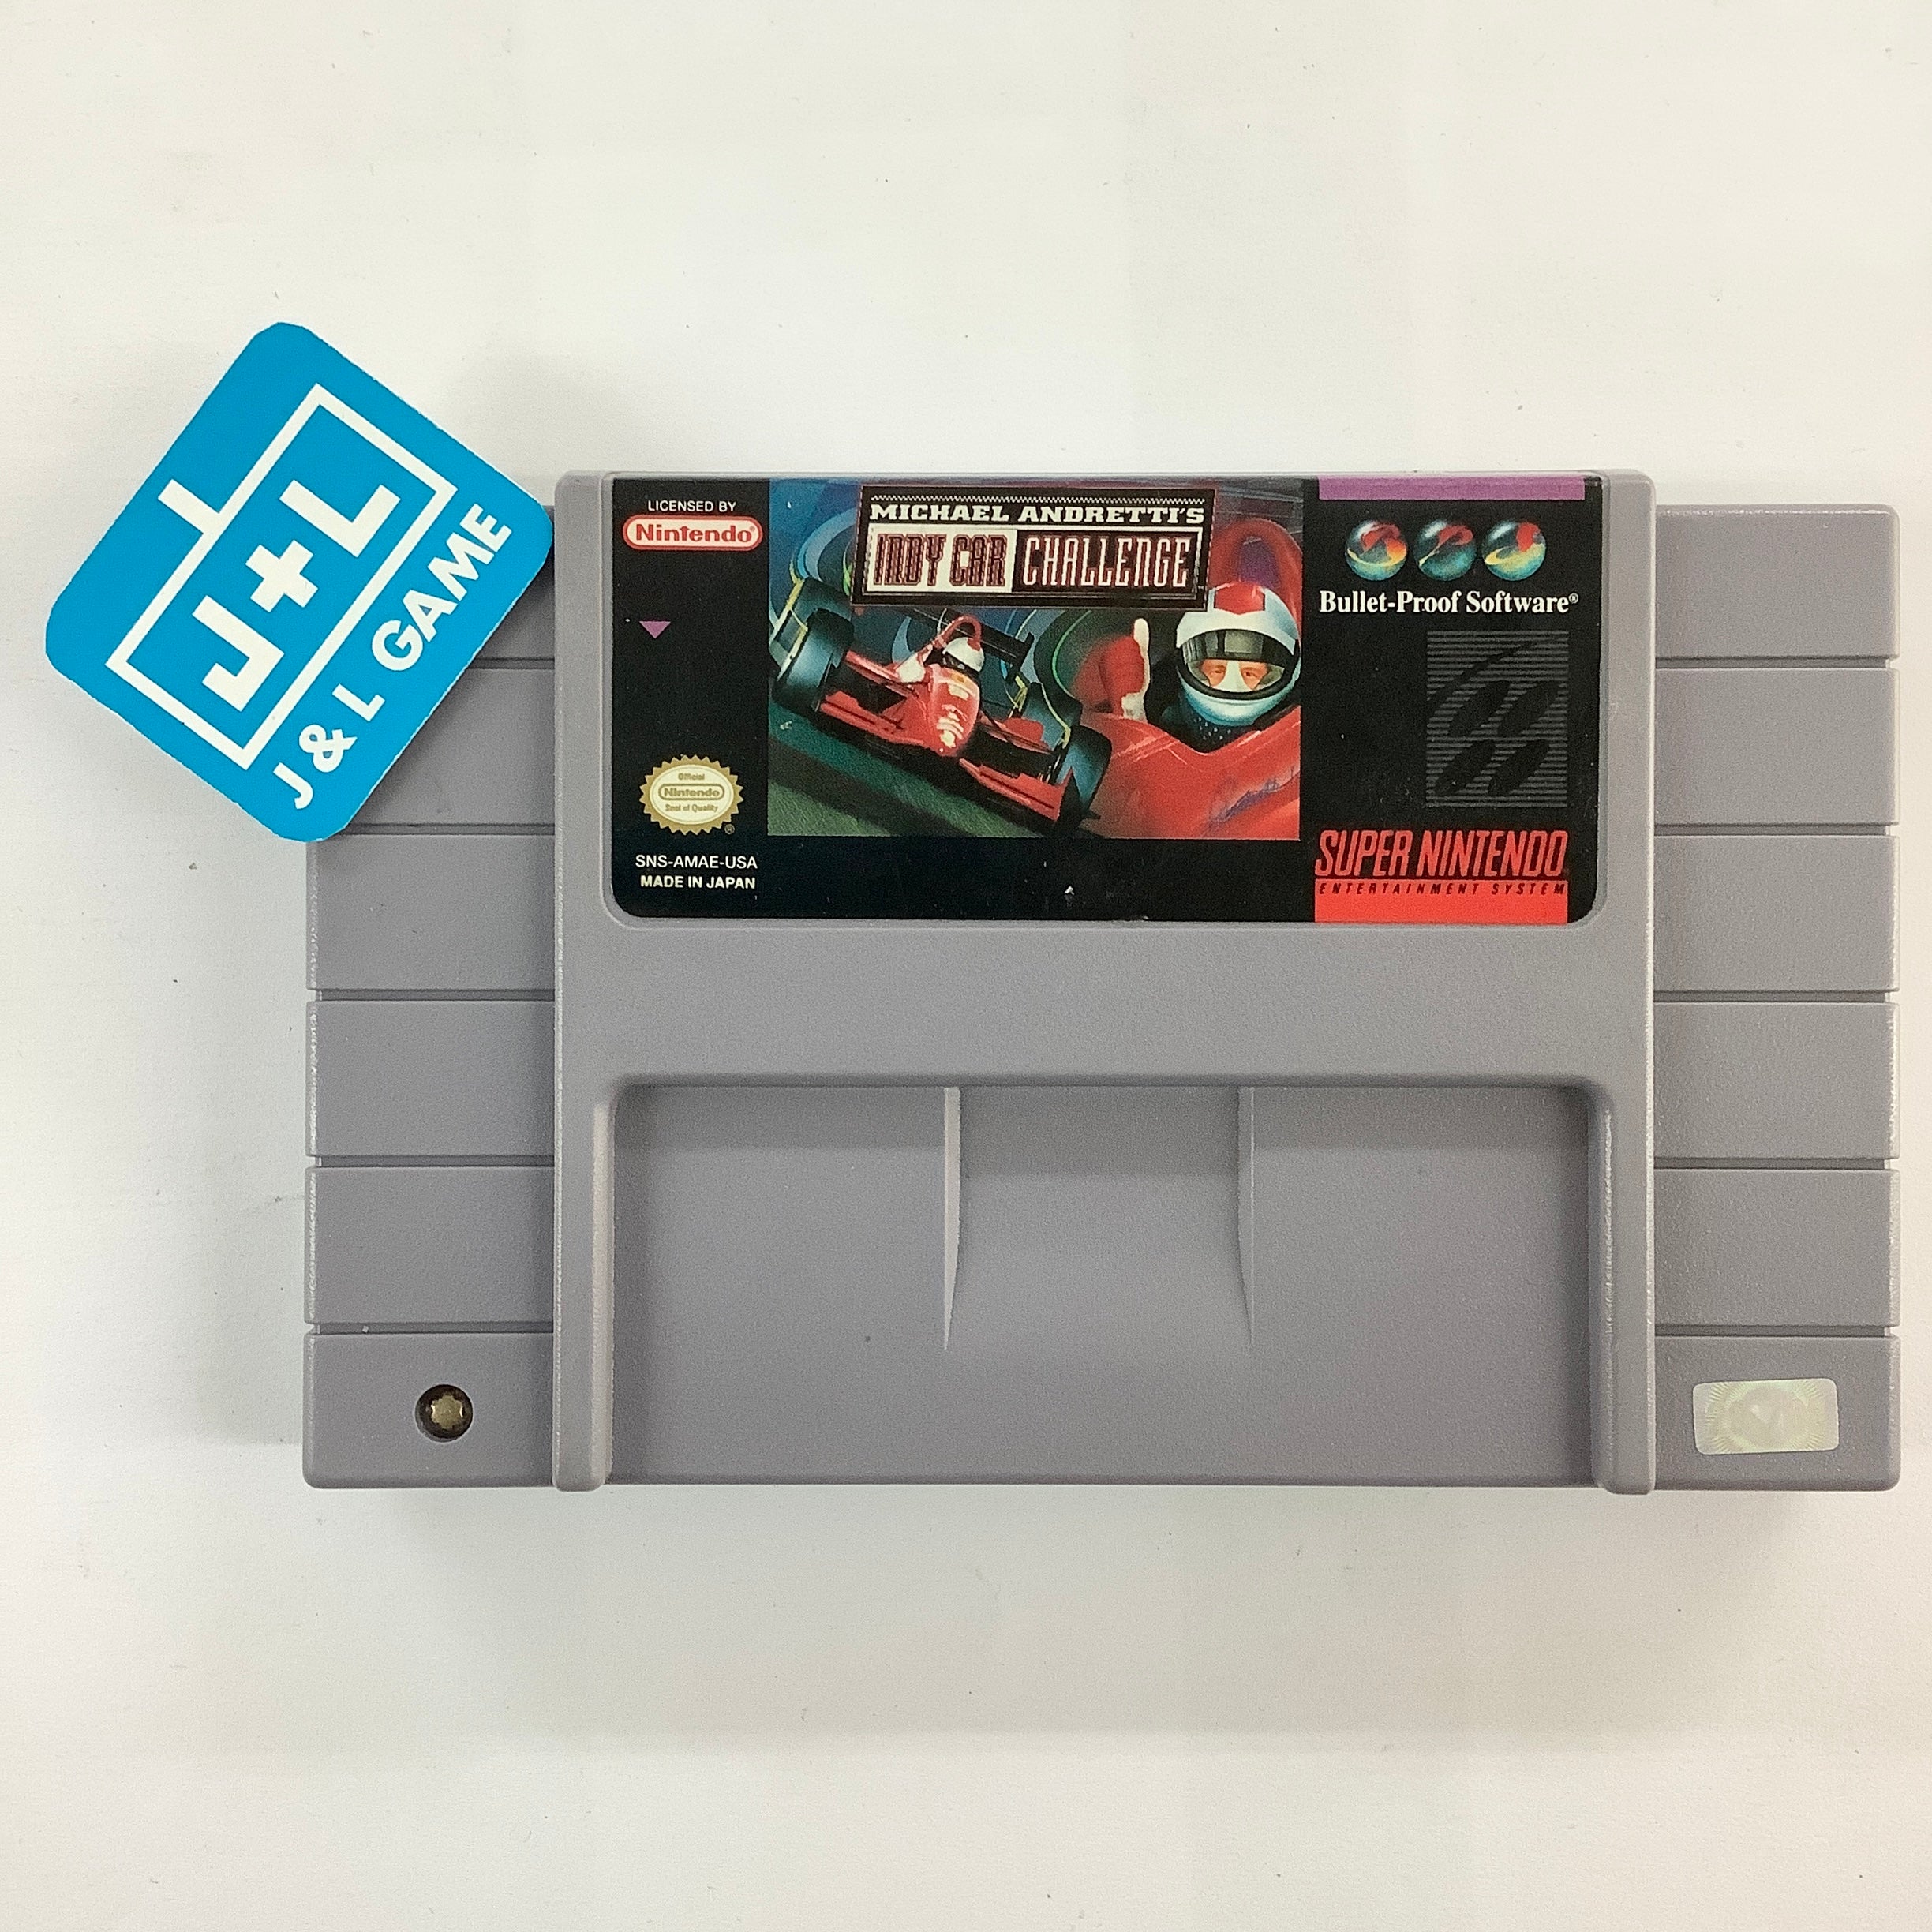 Michael Andretti's Indy Car Challenge - (SNES) Super Nintendo [Pre-Owned] Video Games Bullet Proof Software   